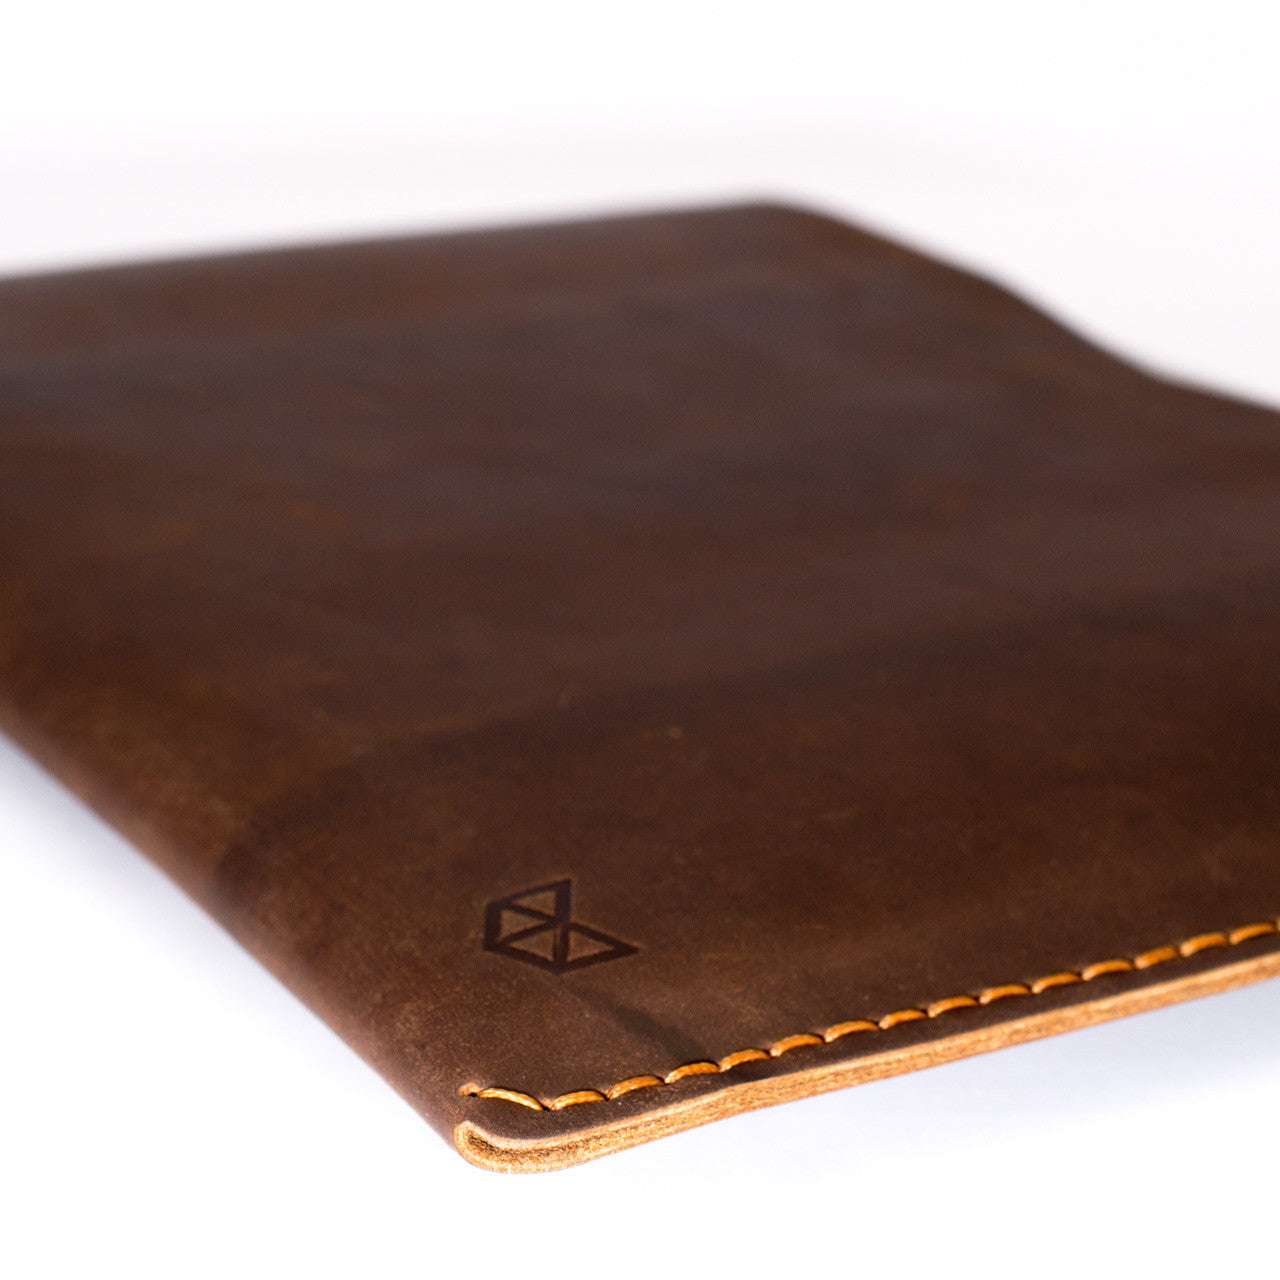 BASIC // MARRON: Leather Dell XPS laptop Sleeve Case by Capra Leather